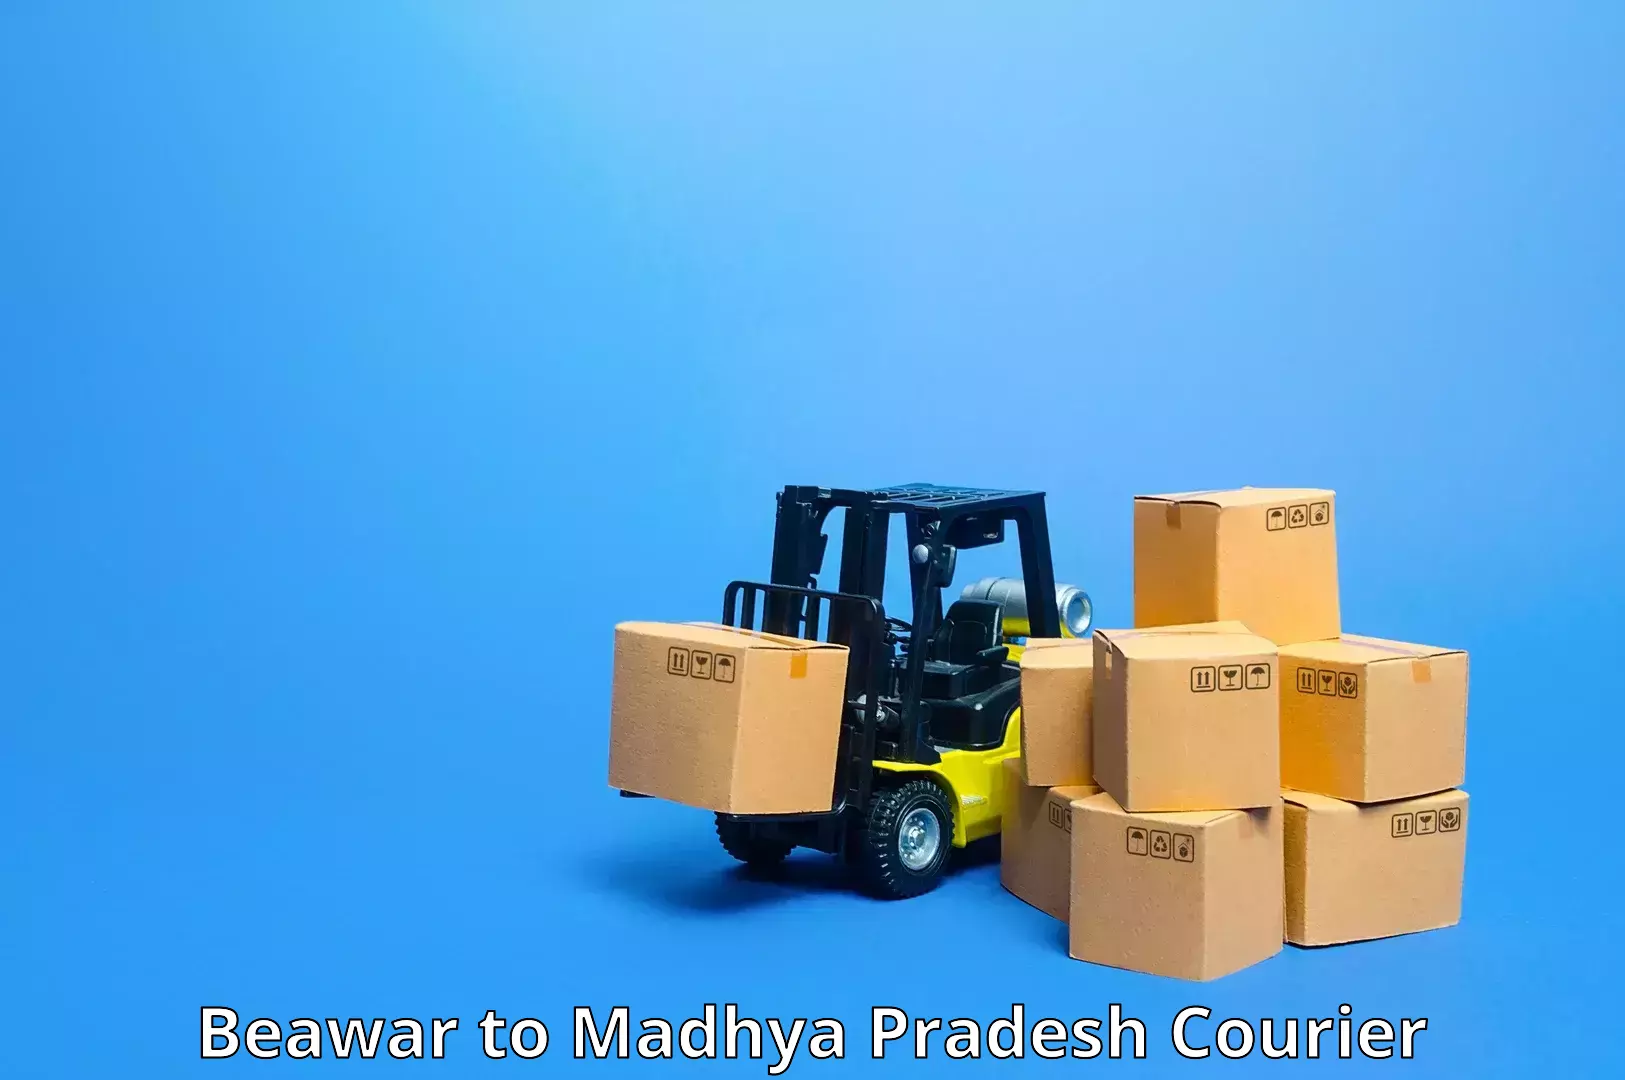 Large-scale shipping solutions in Beawar to Maheshwar